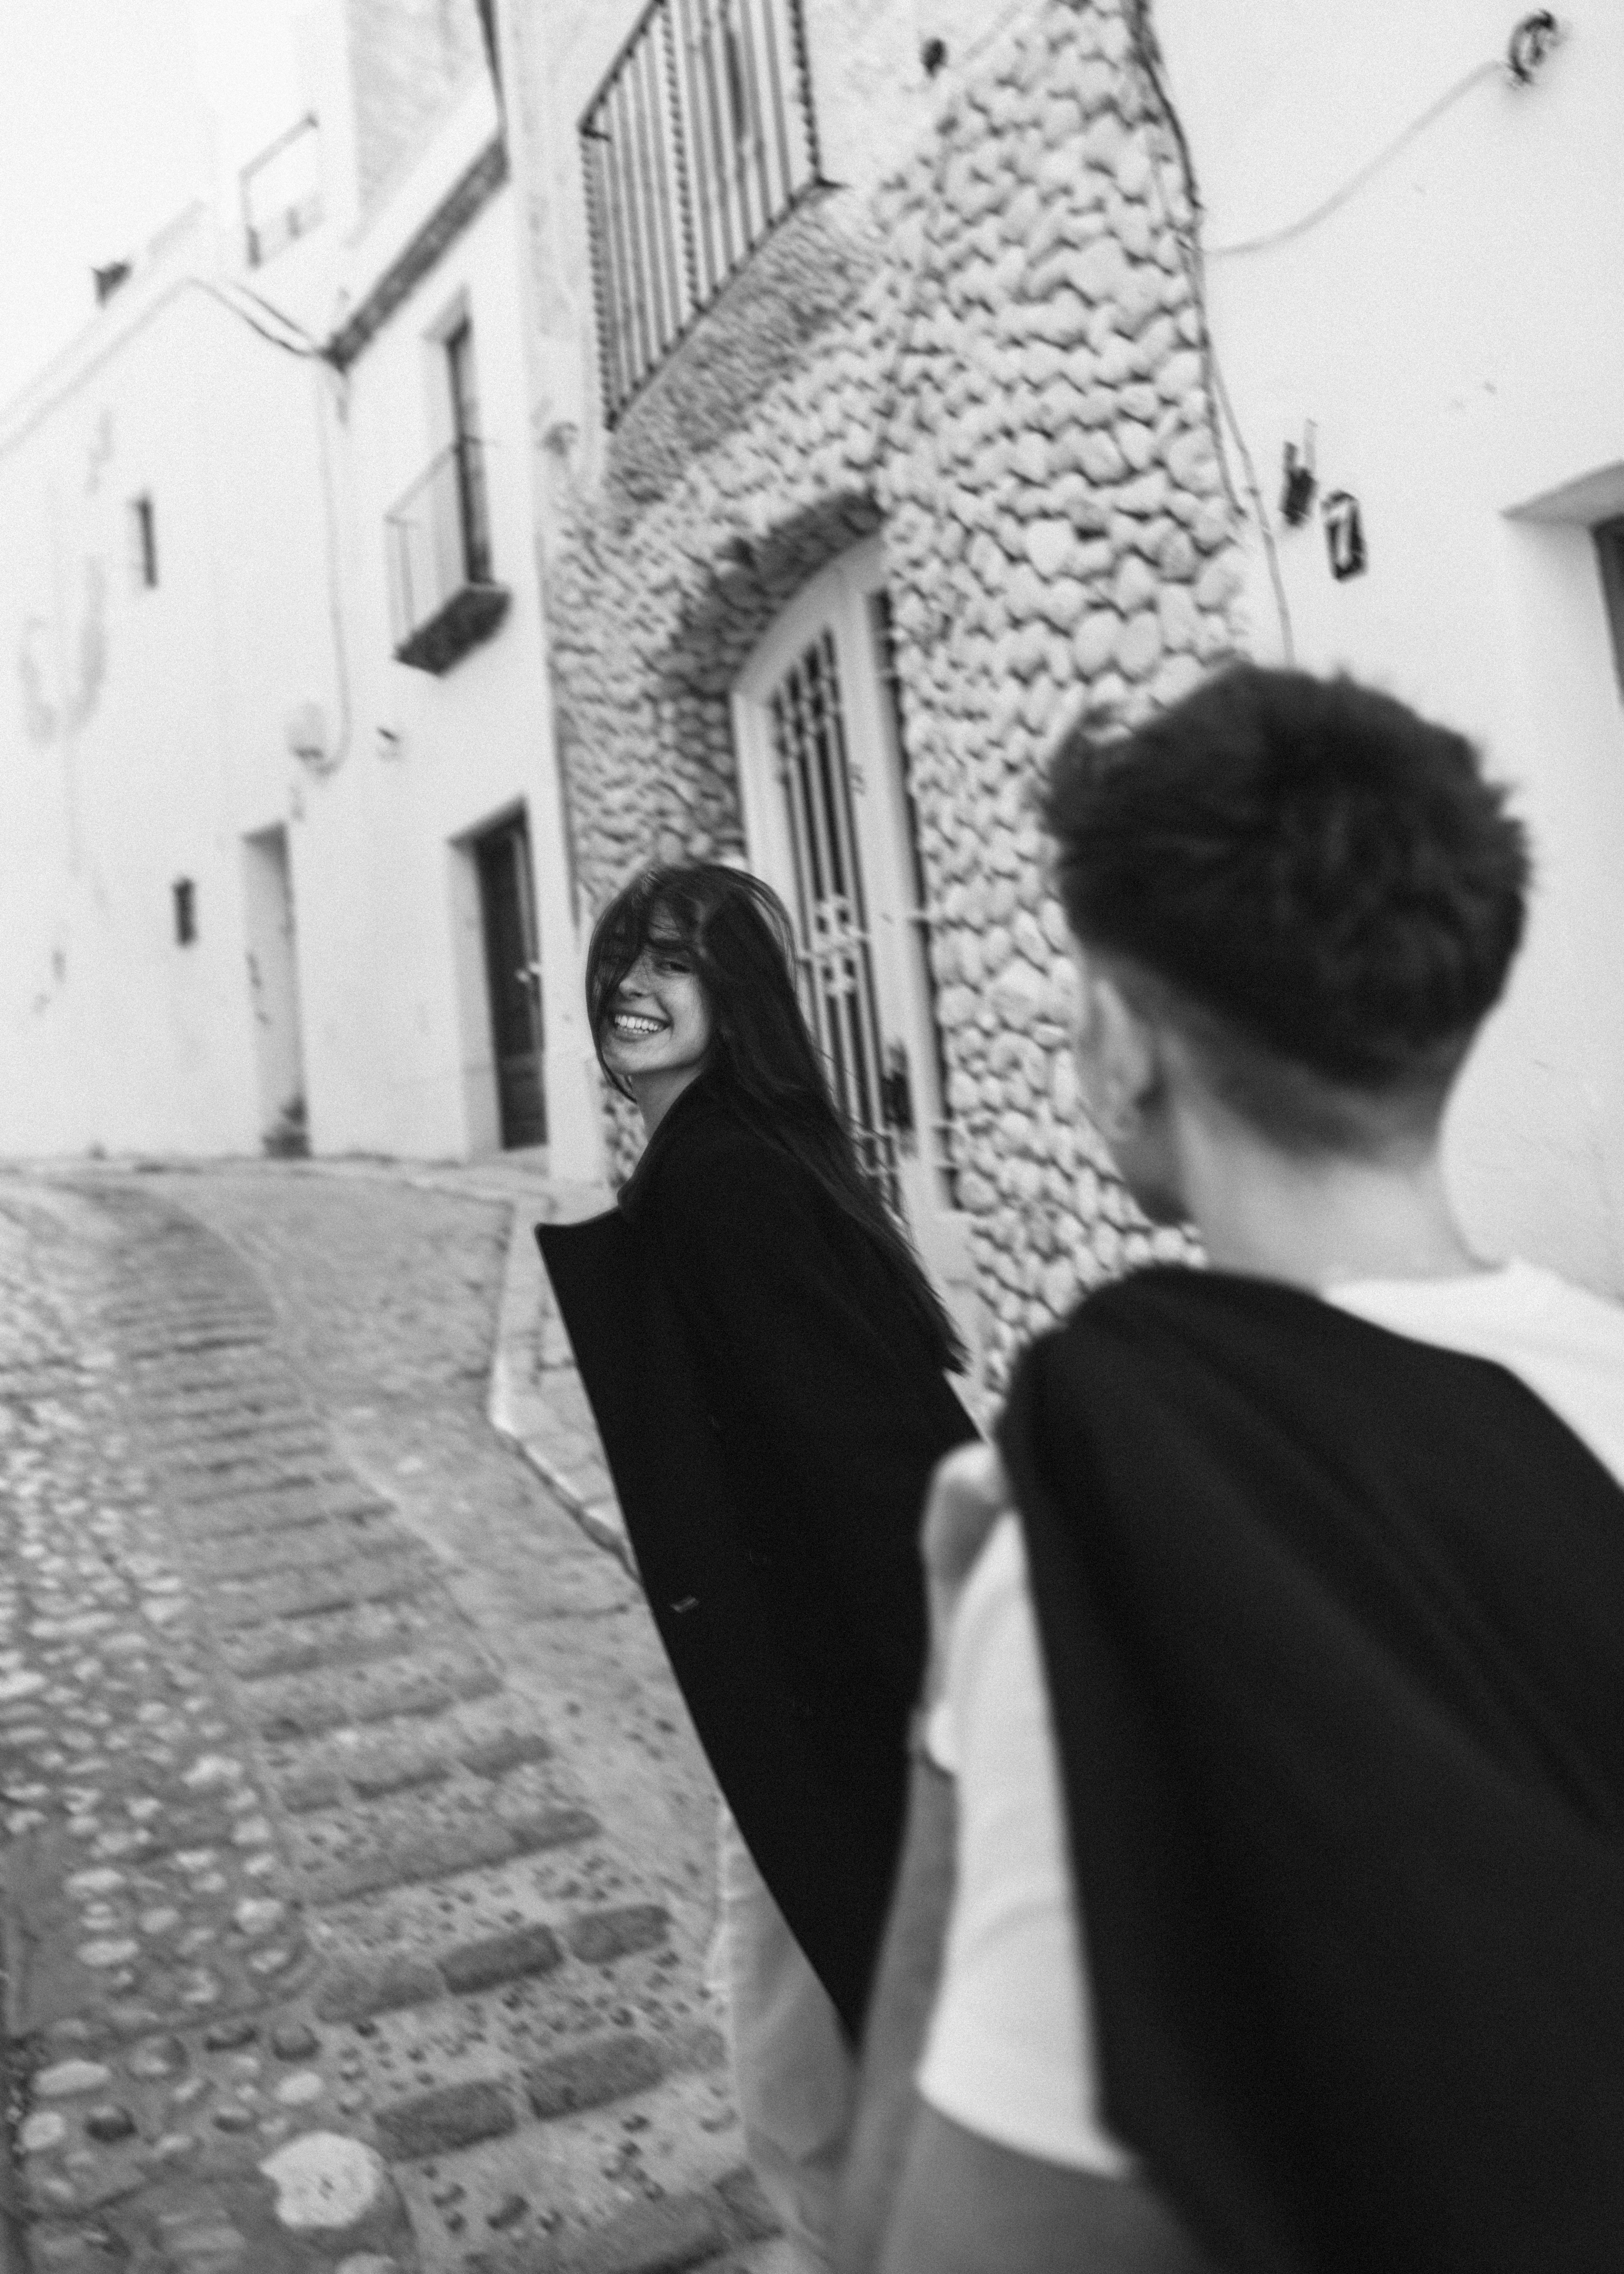 Artistic Couples on Sitges' Streets: Editorial Excellence